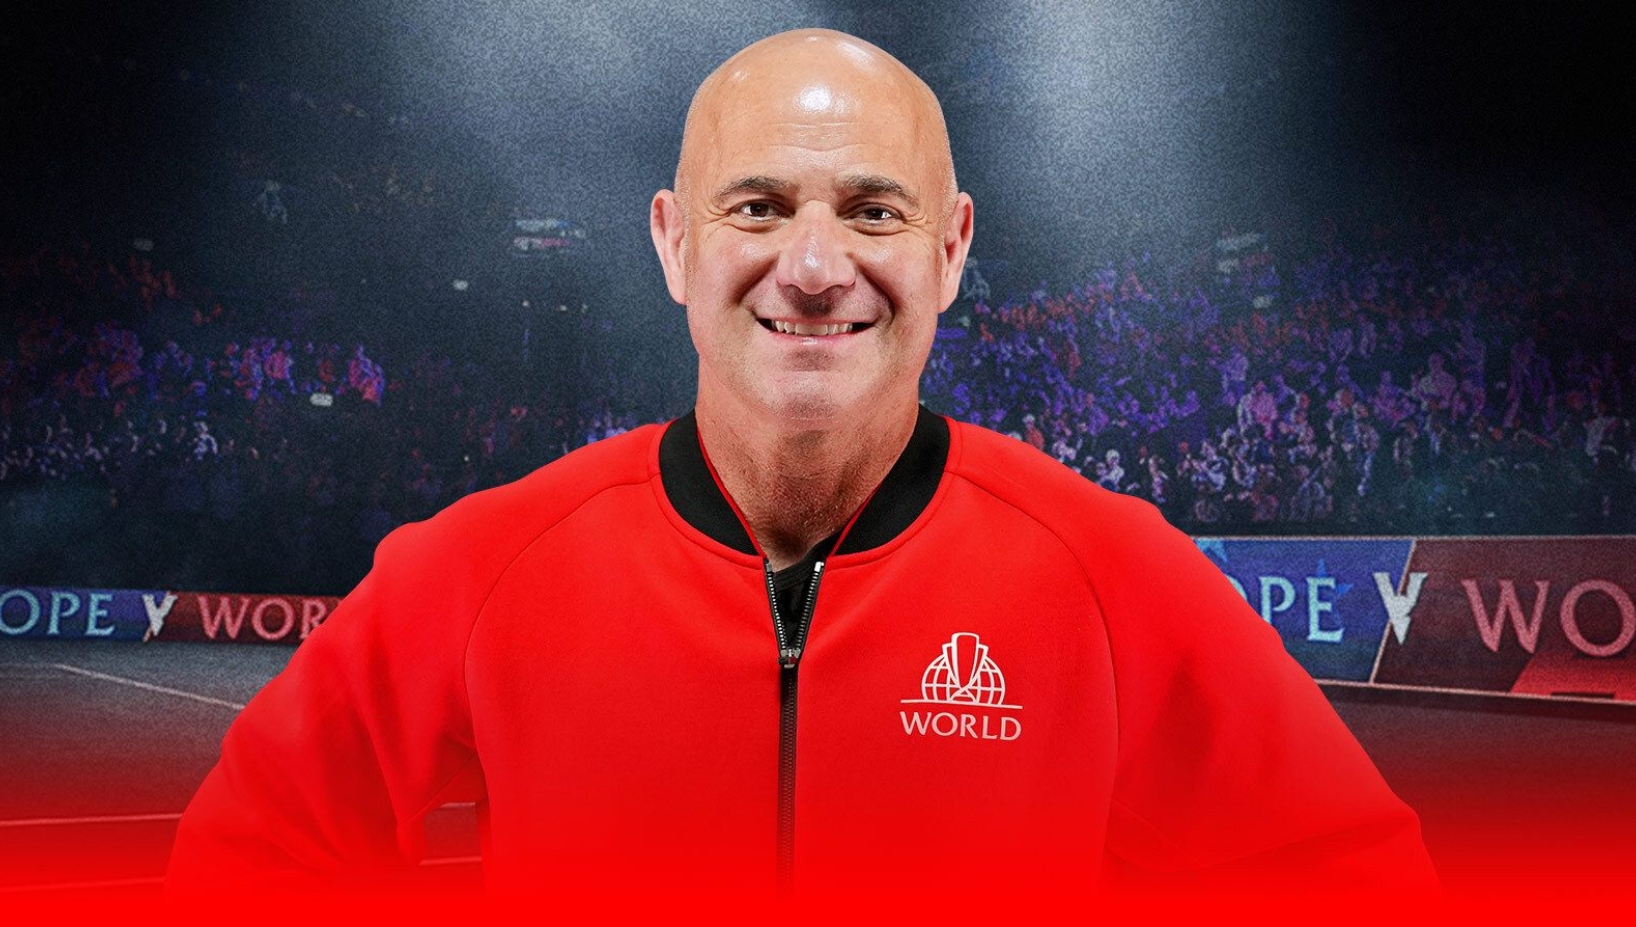 Andre Agassi to Lead Team World as Captain at 2025 Laver Cup